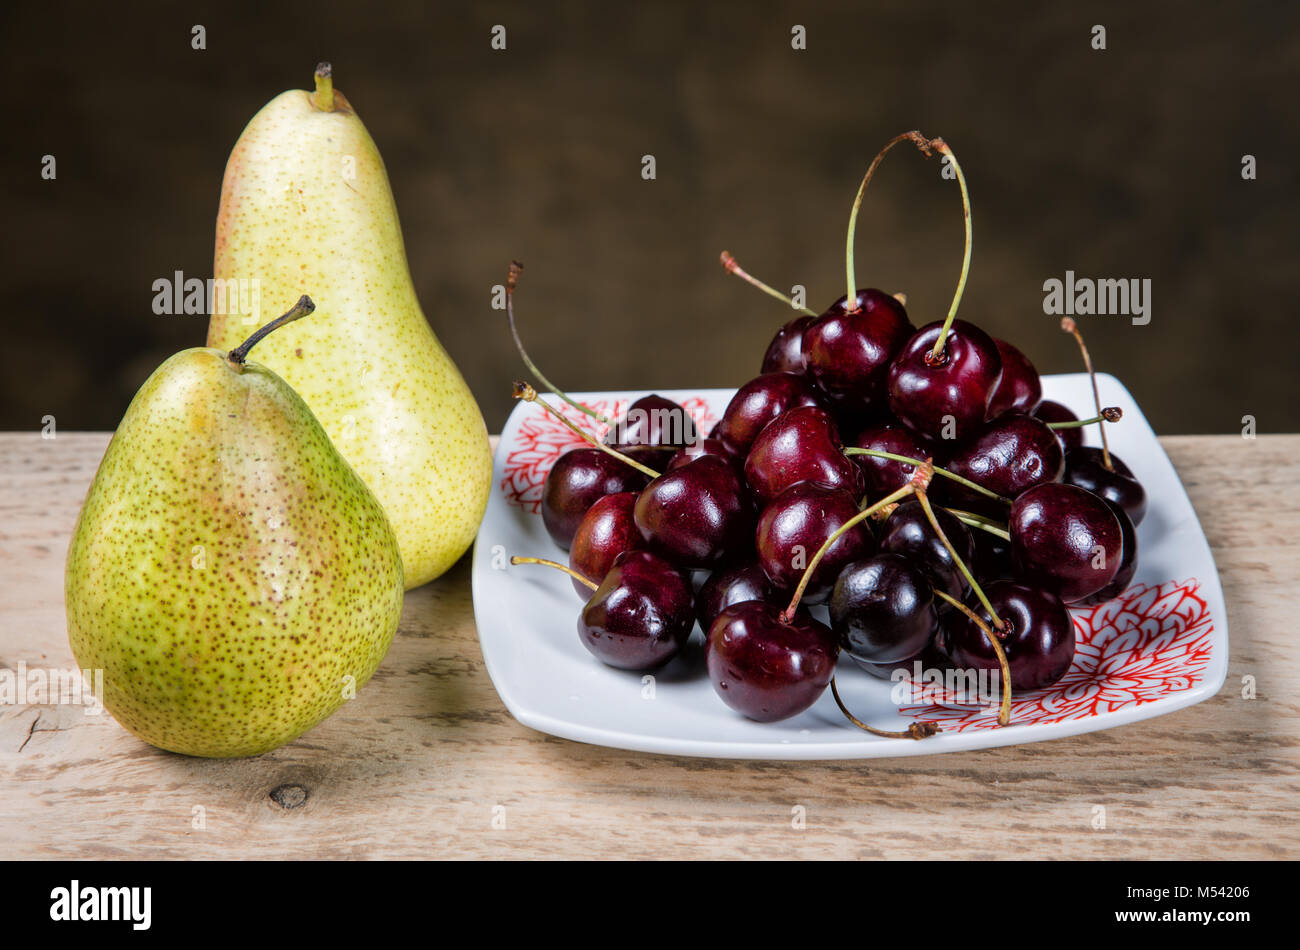 berries cherries in a plate and pears on a table Stock Photo